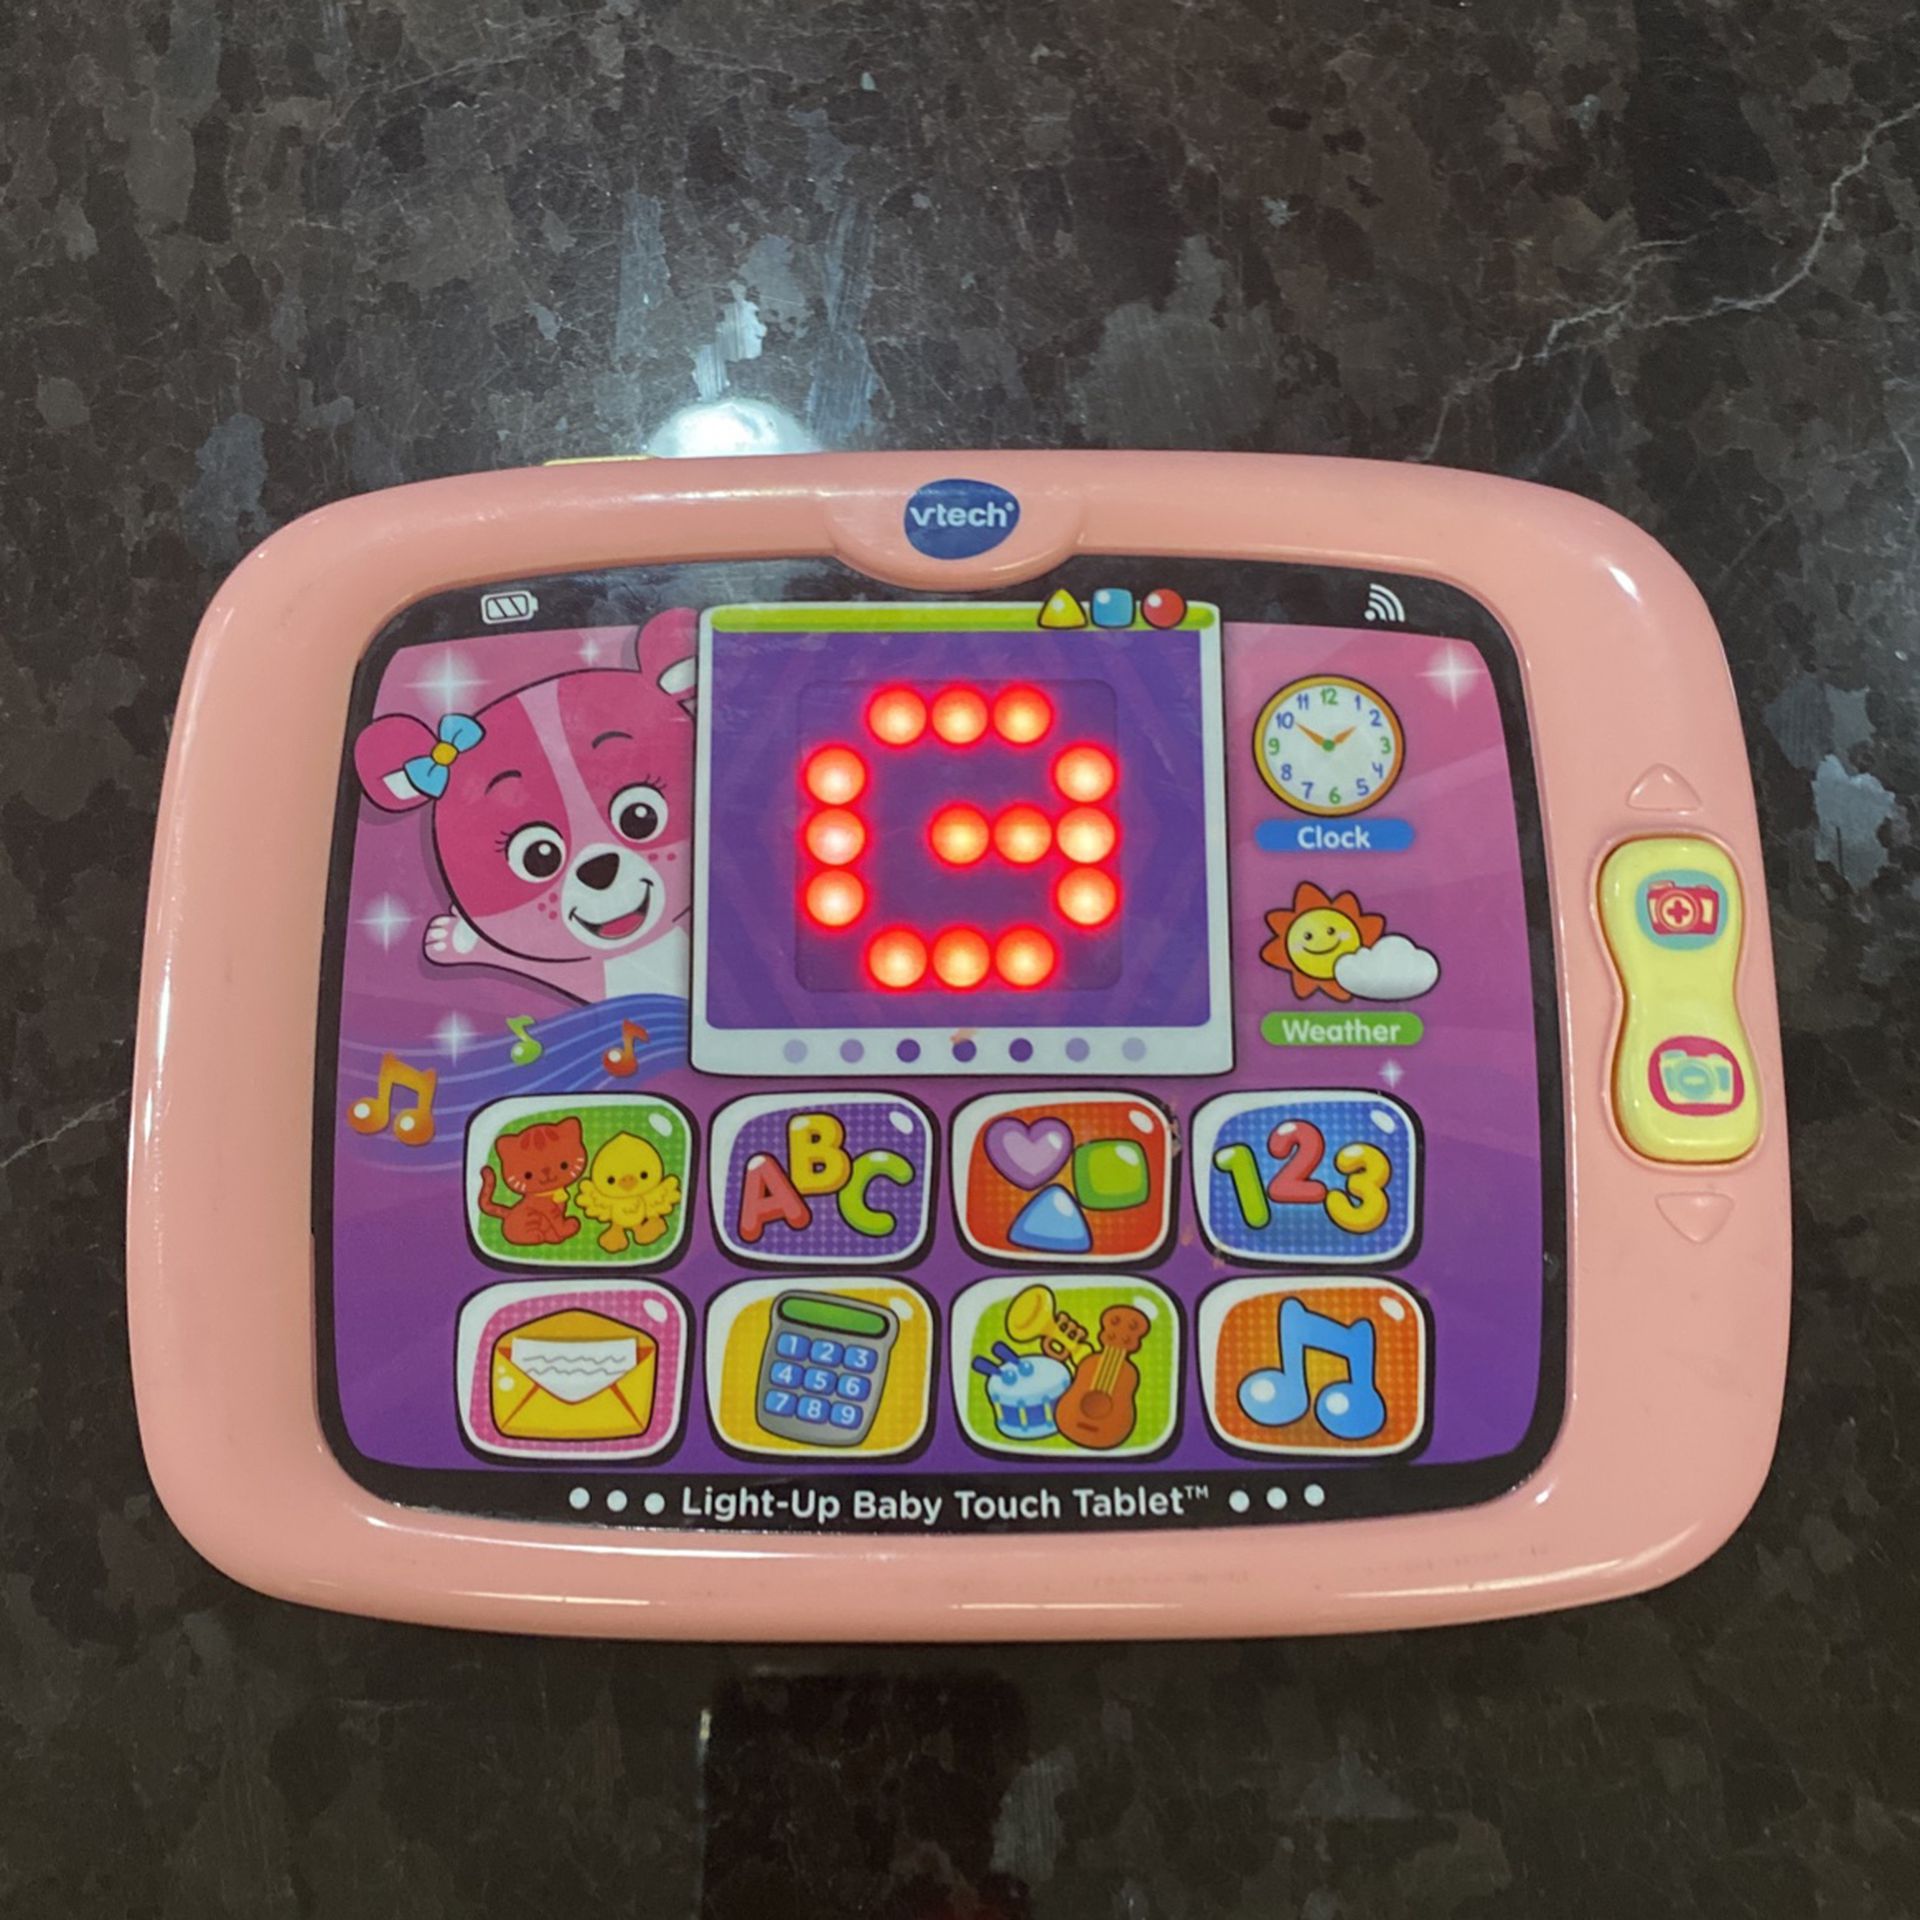 Vtech Light-up Baby Touch Tablet